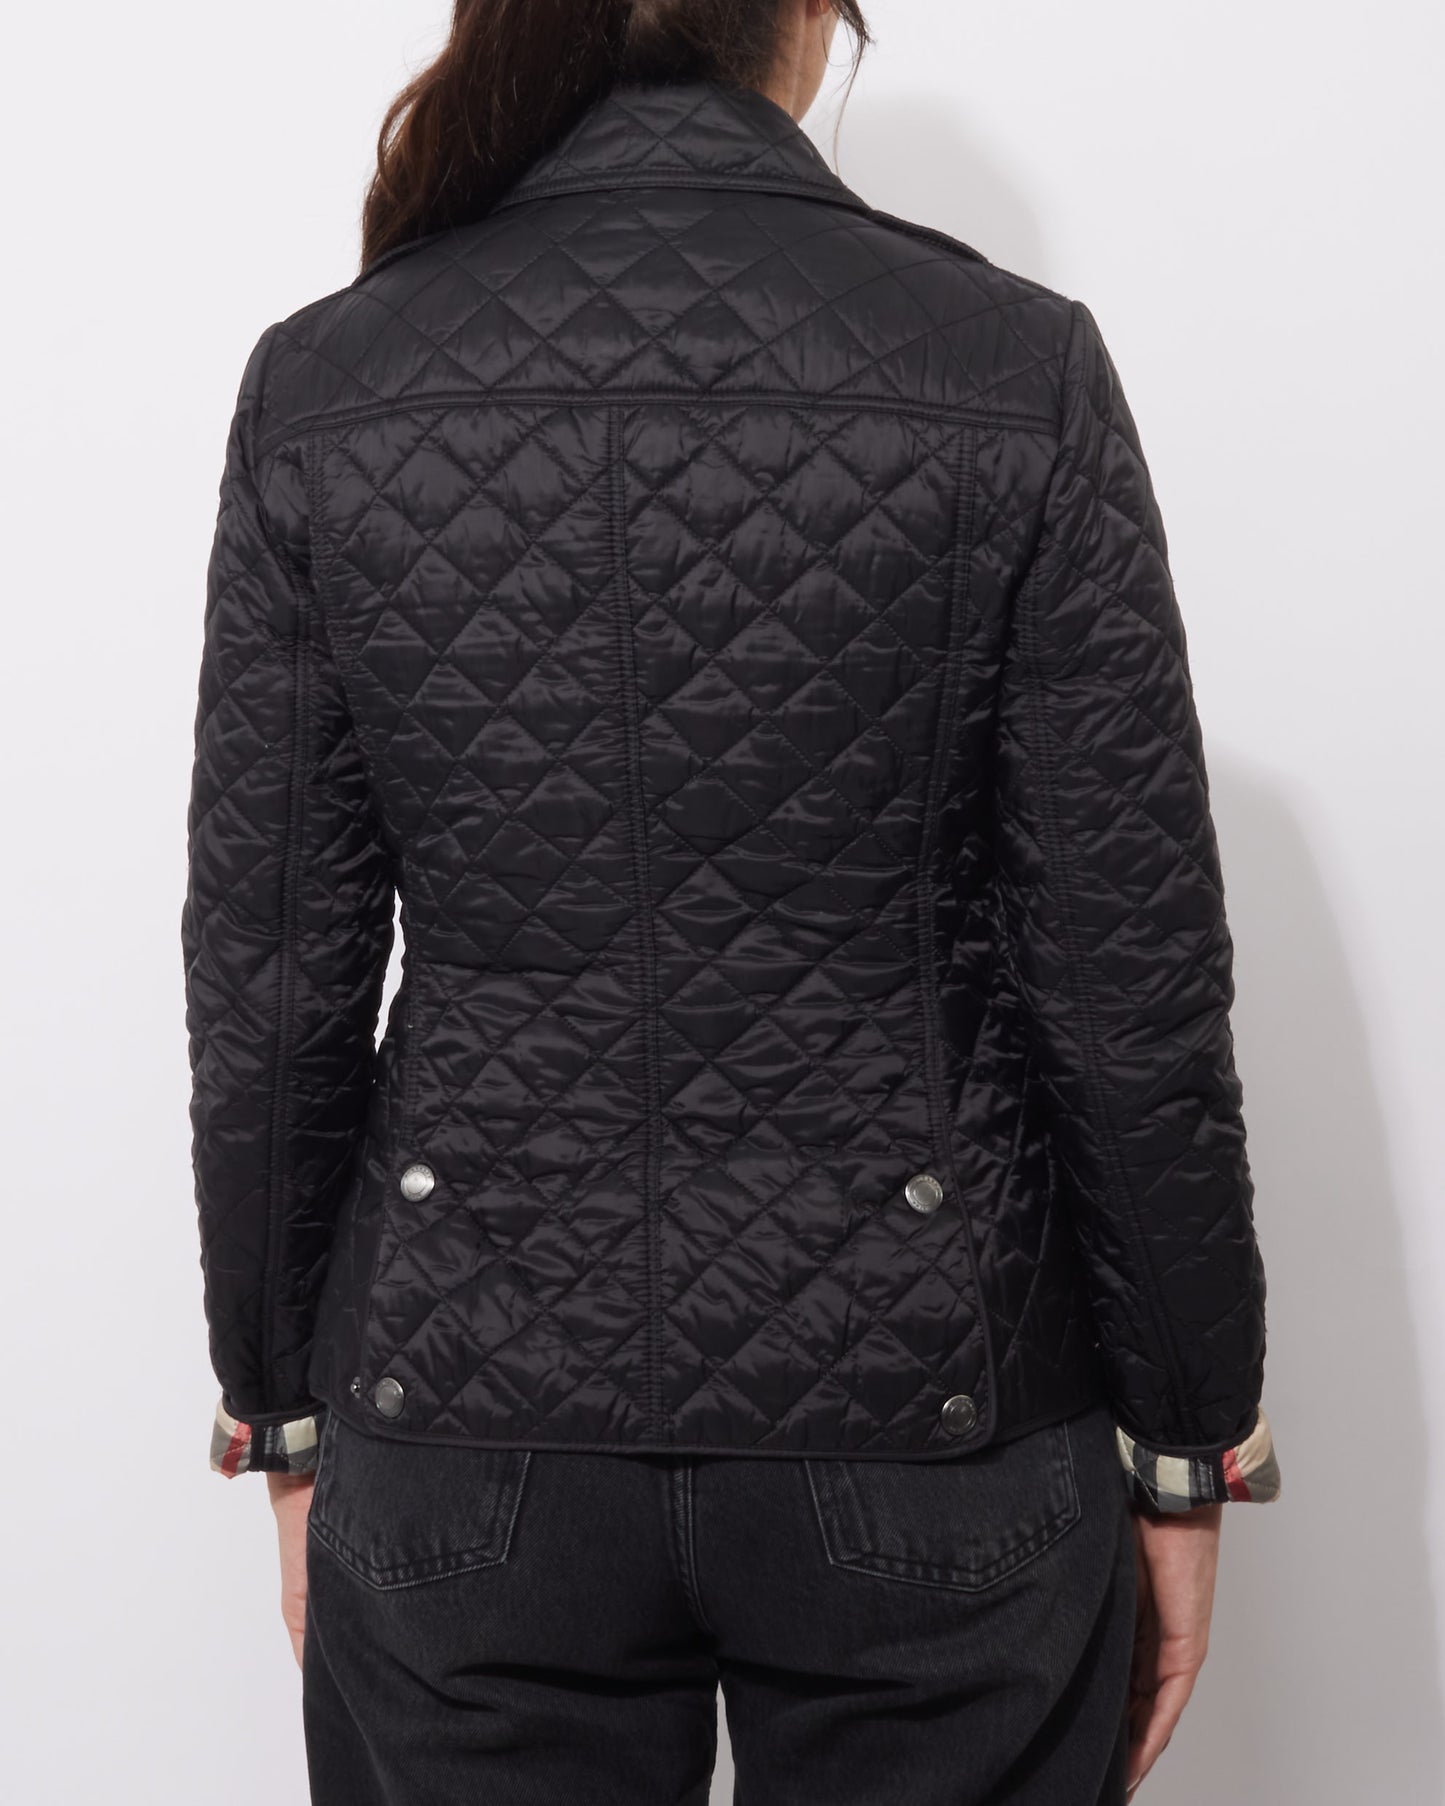 Burberry Black Quilted Nylon Short Jacket - XS